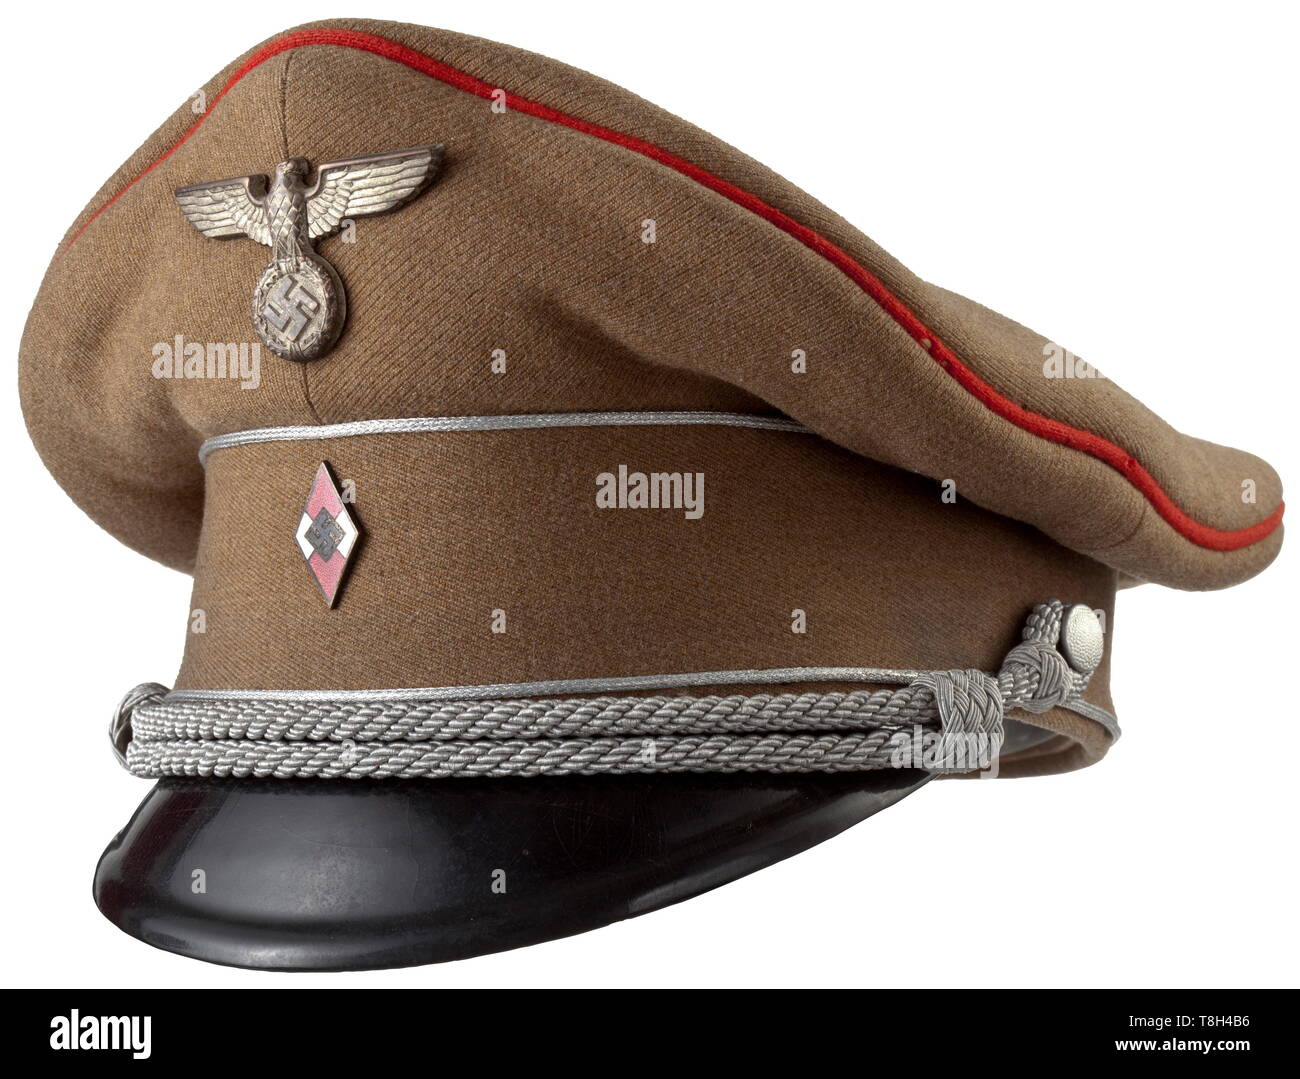 A visor cap for the senior leadership For the ranks of Gefolgschaftsführer (escort leader) and Hauptgefolgschaftsführer (senior escort leader). Brown cotton twill with silver pipings on the cap body and red cover piping (moth traces), silver-plated HJ emblem and leader's eagle, silver cap cord and black lacquered visor. Light yellow silk lining with cellon cap trapezoid (flaw) and RZM tag 'Tuchmütze' under the leather sweatband. historic, historical, 20th century, 1930s, League of German Girls, Band of German Maidens, youth organization, youth organizations, NS, National So, Editorial-Use-Only Stock Photo